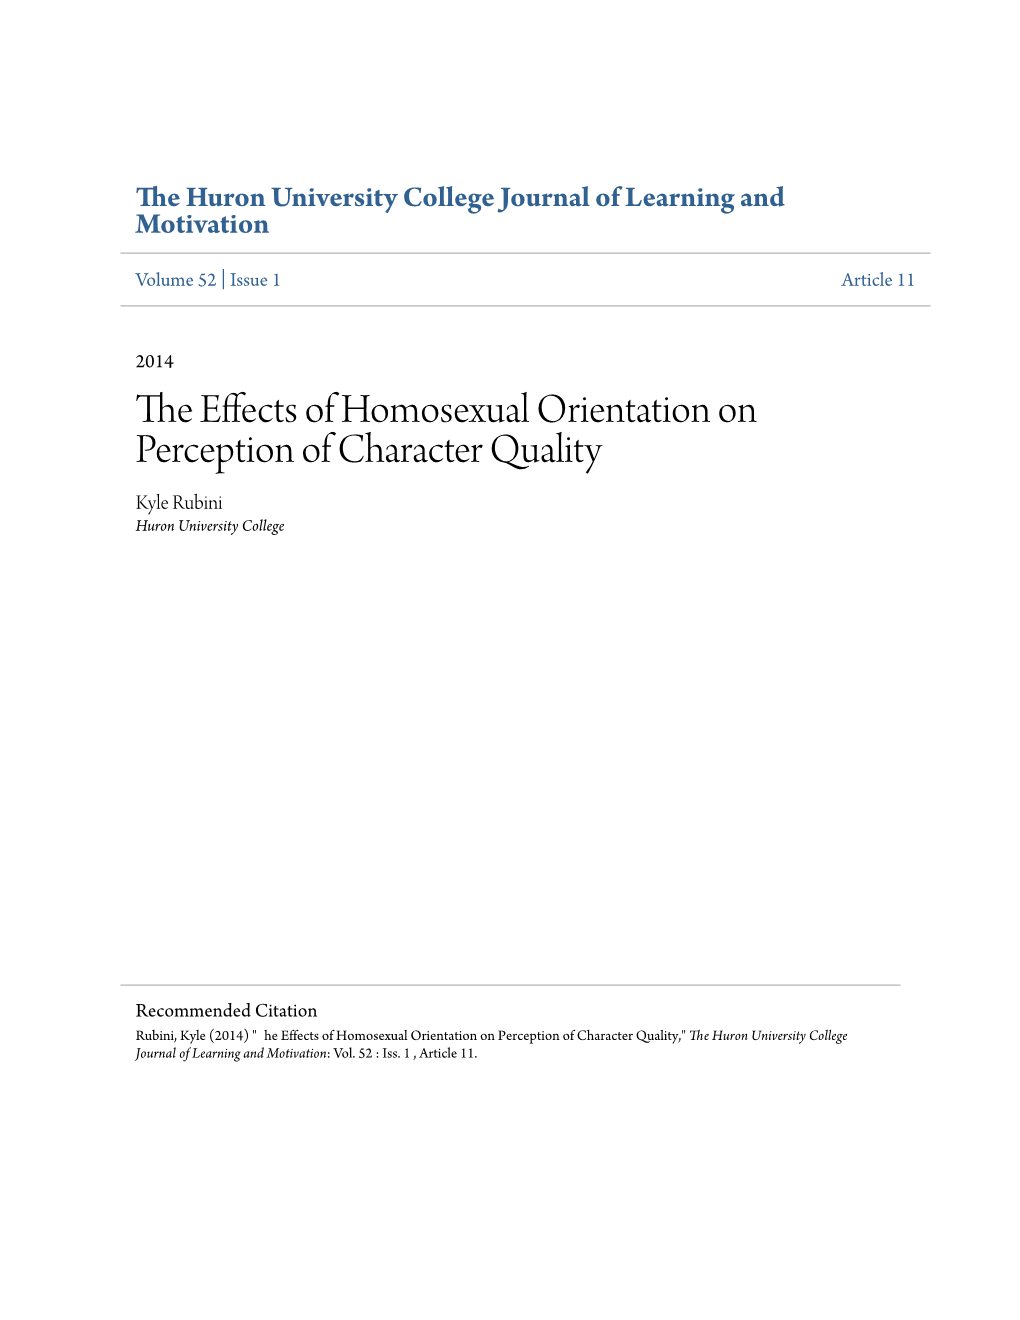 The Effects of Homosexual Orientation on Perception of Character Quality Kyle Rubini Huron University College